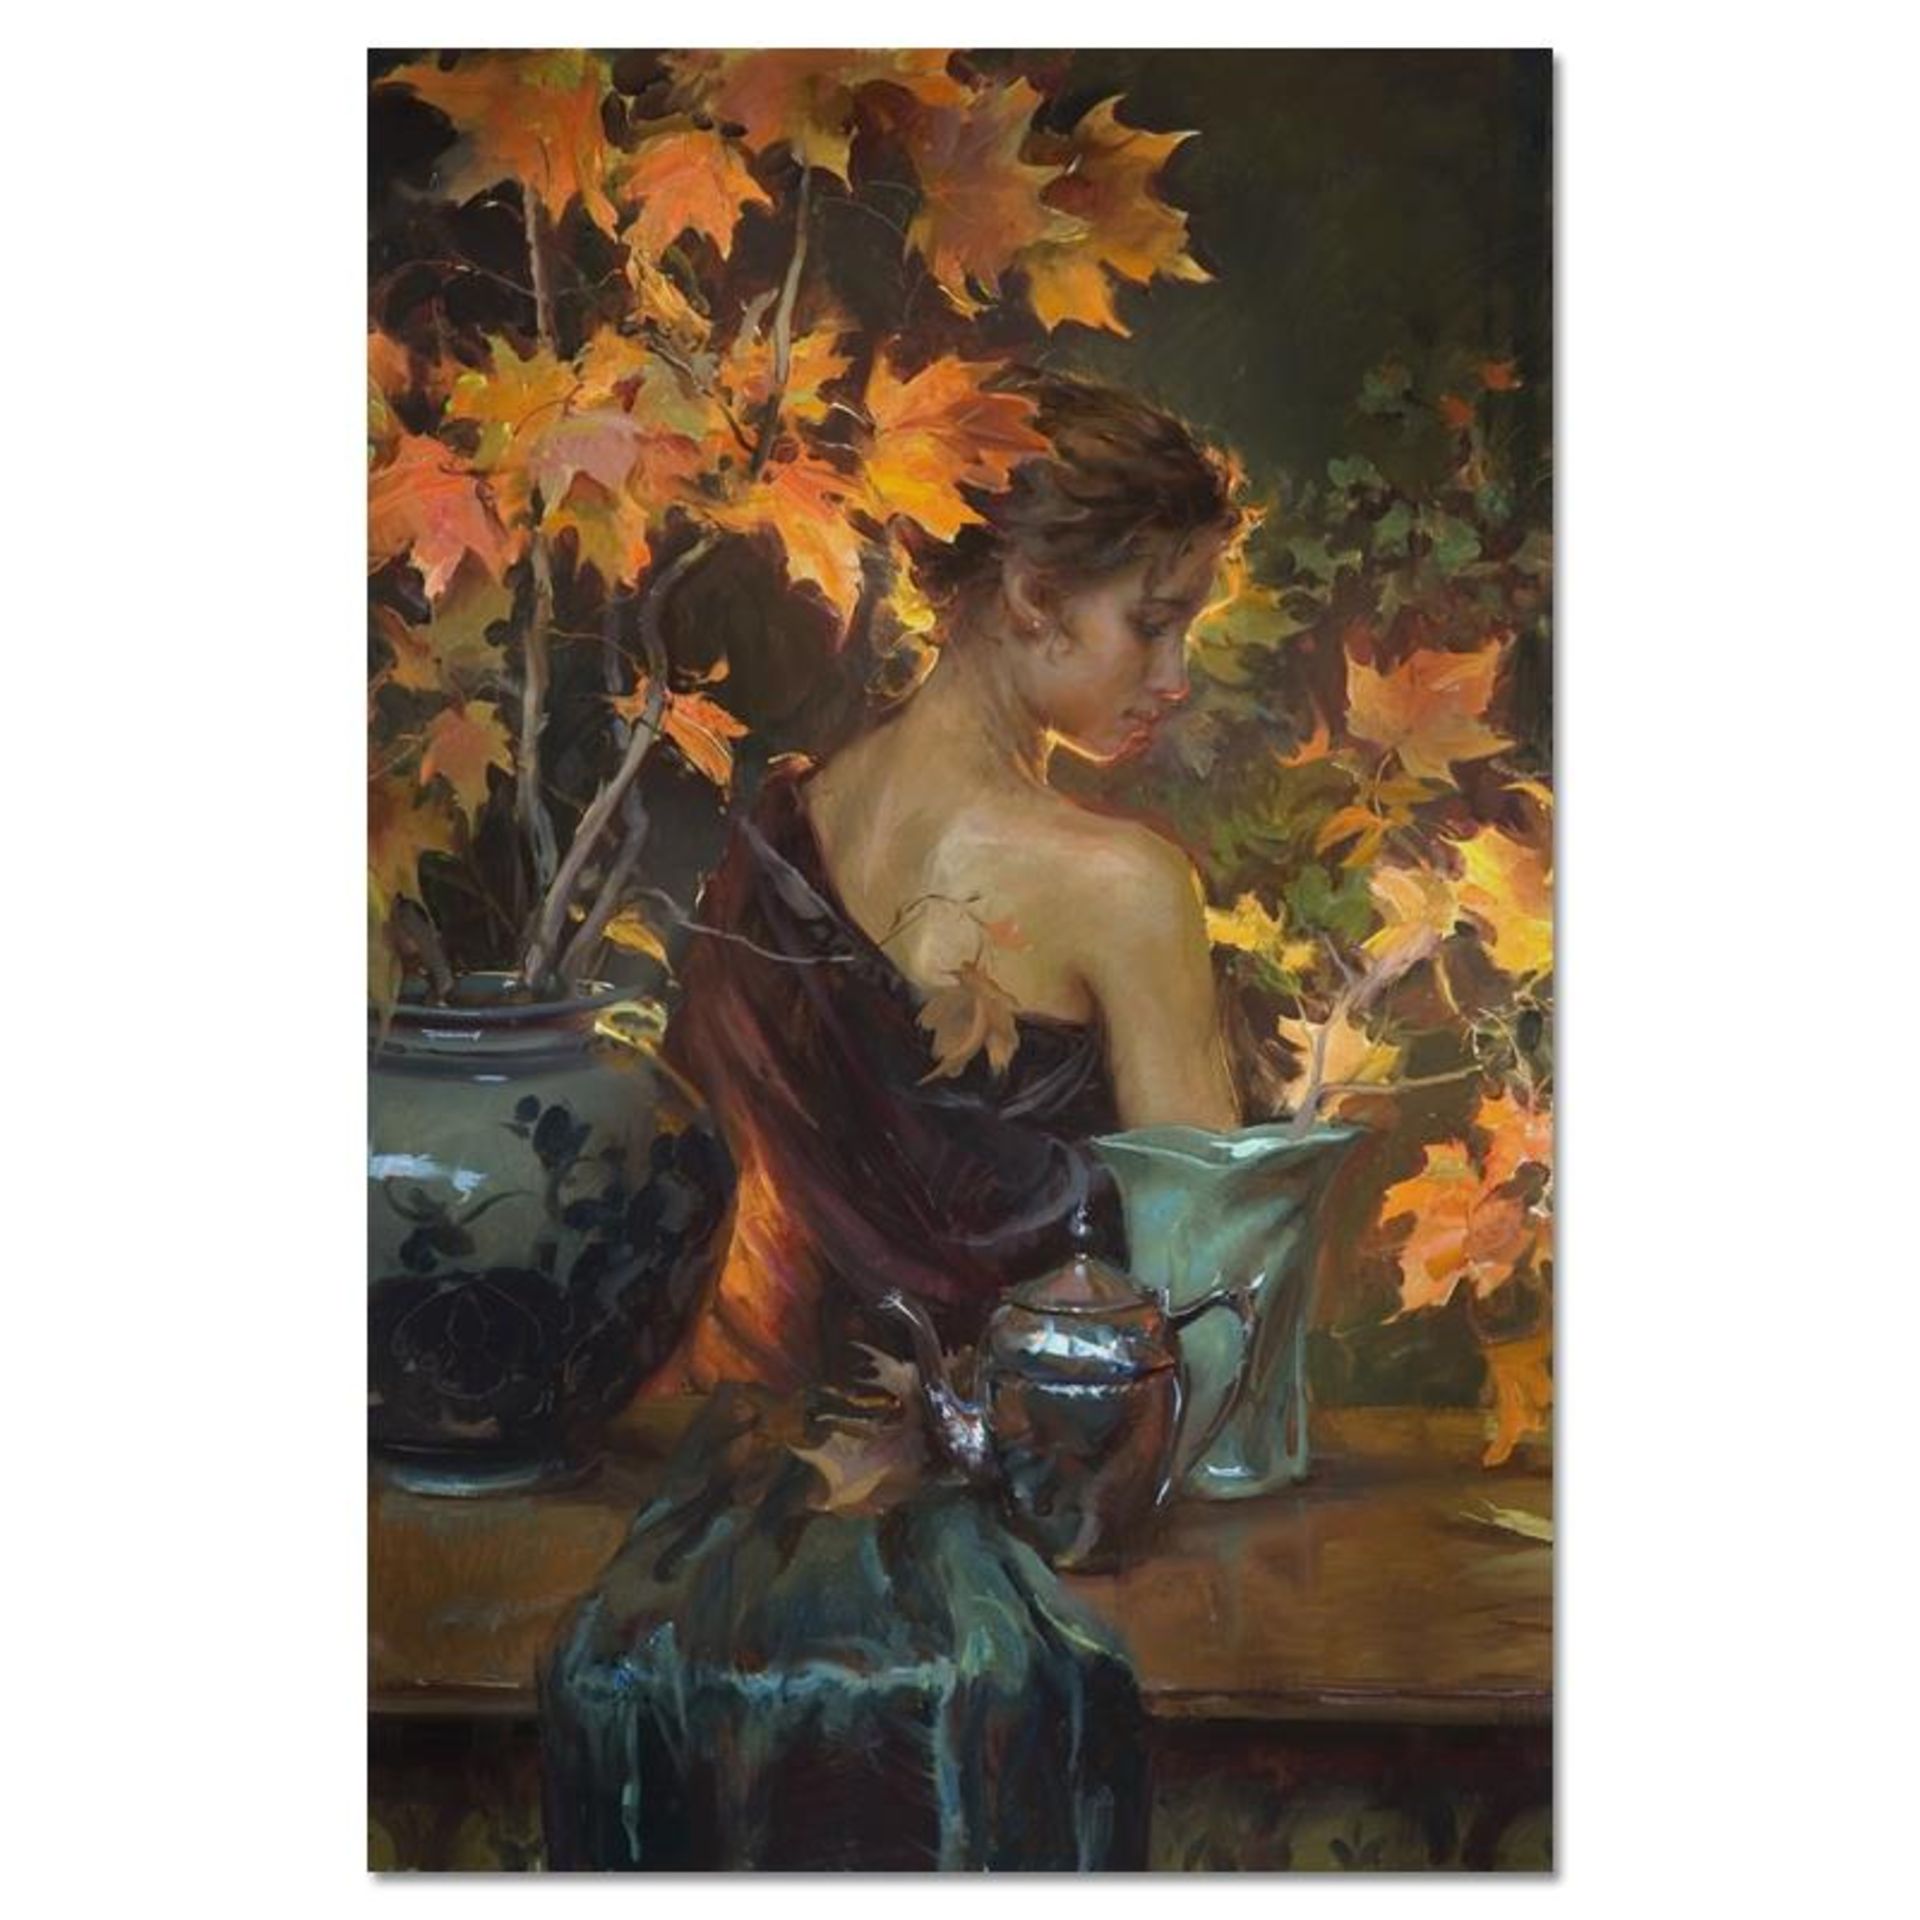 Dan Gerhartz, "October Glow" Limited Edition on Canvas, Numbered and Hand Signed